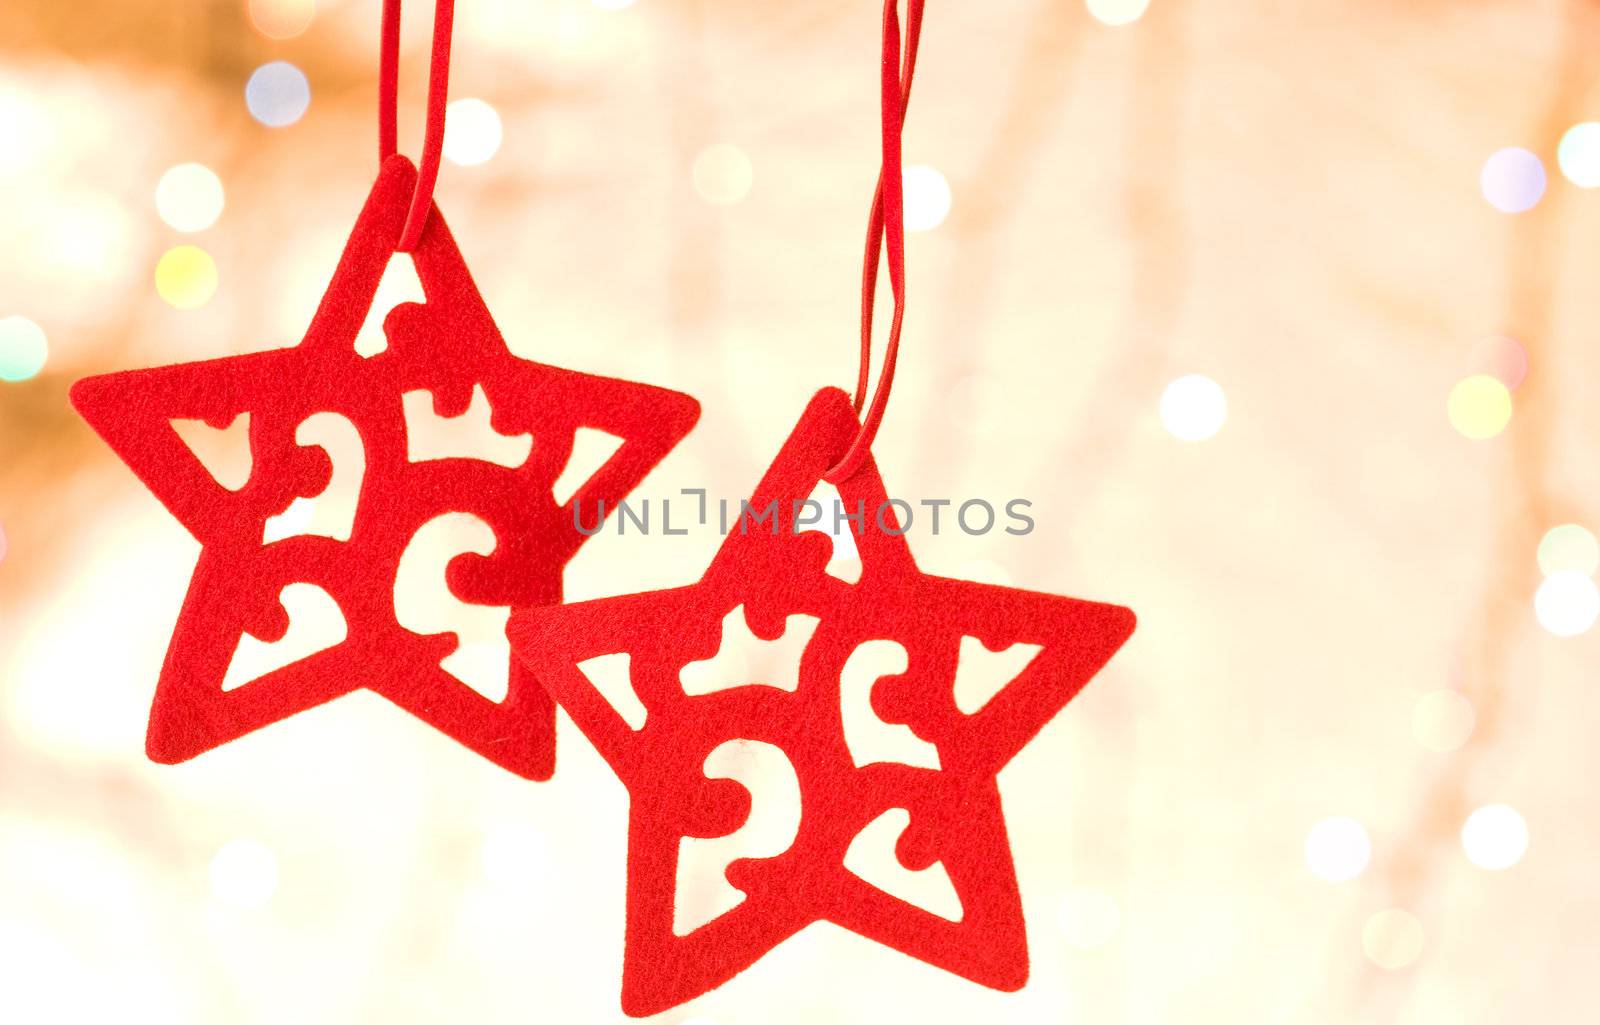 Christmas decorative star over blurred background